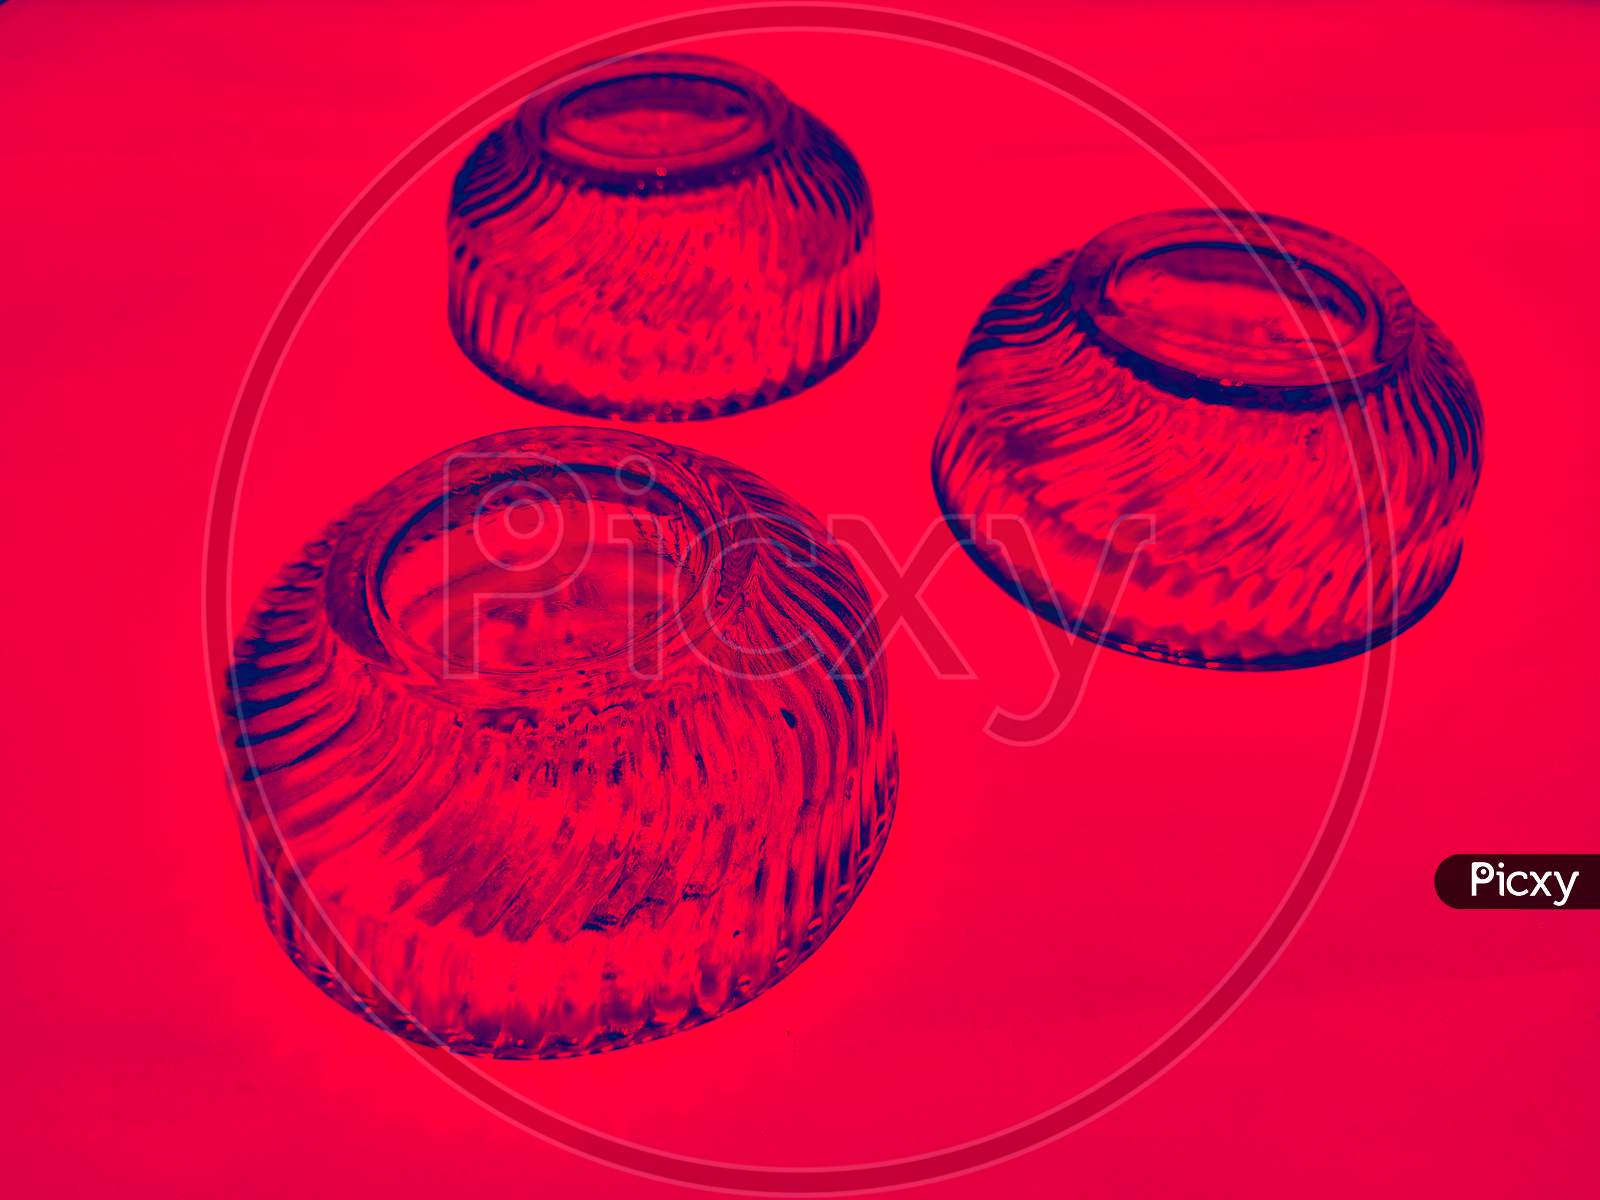 Glass Dooms isolated in blood red background